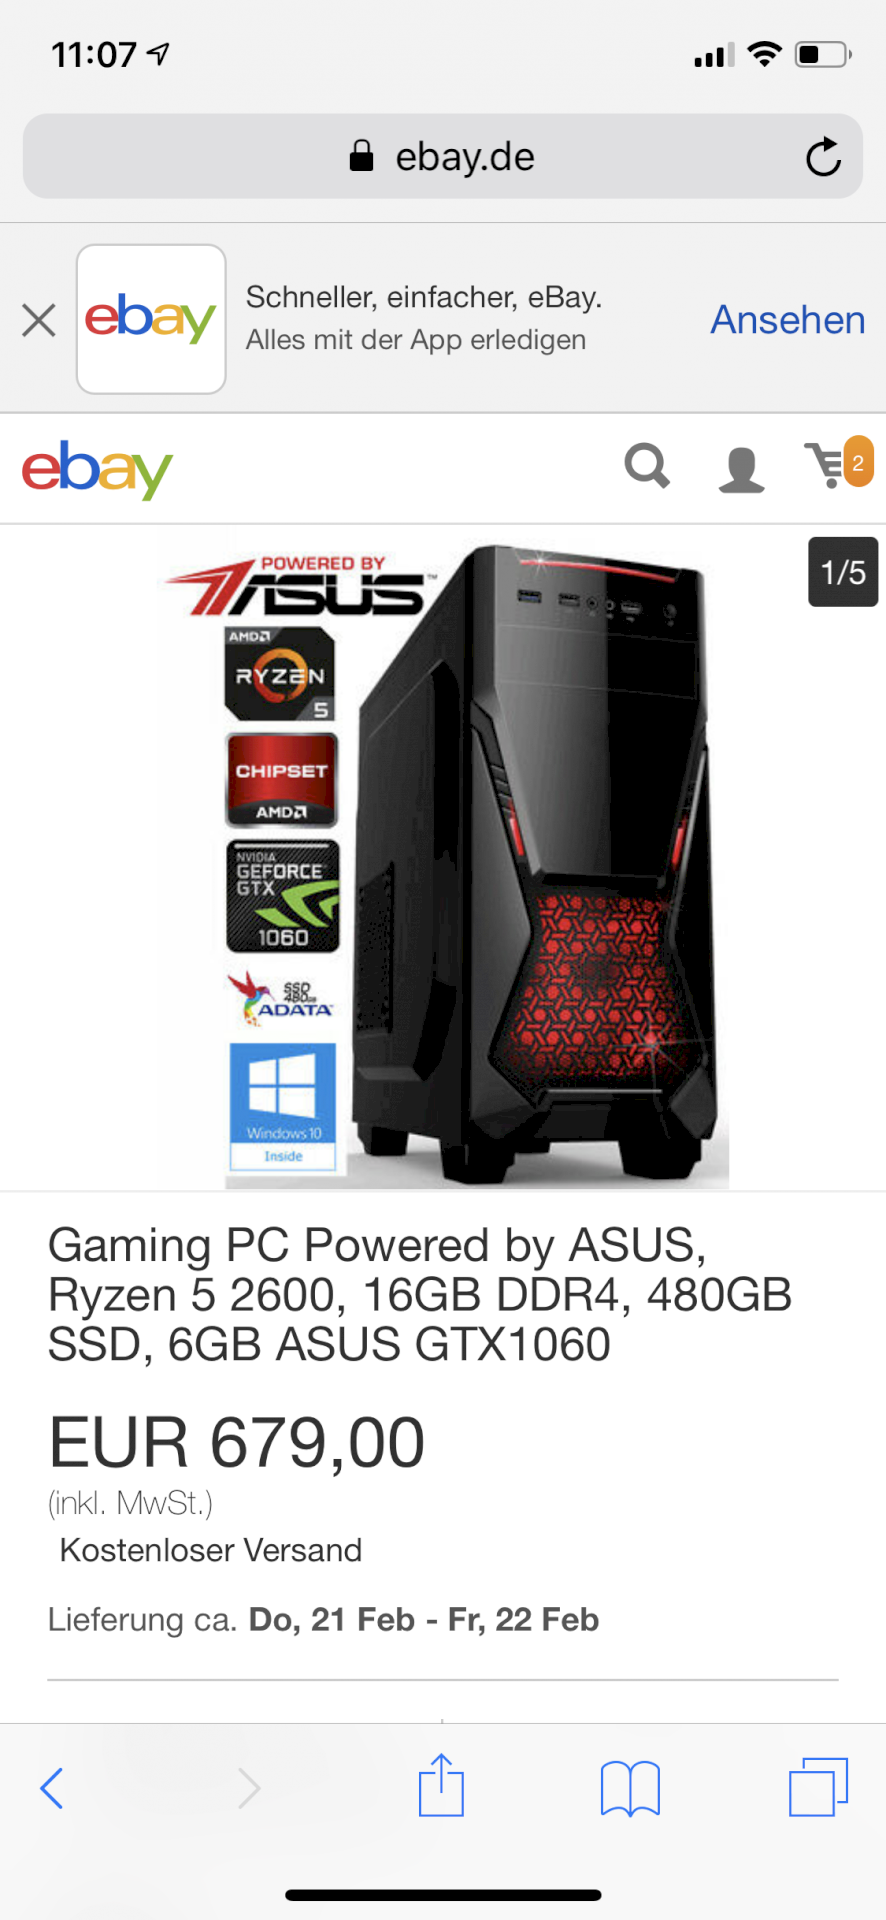 Which of these 3 gaming PCs would you buy - 2